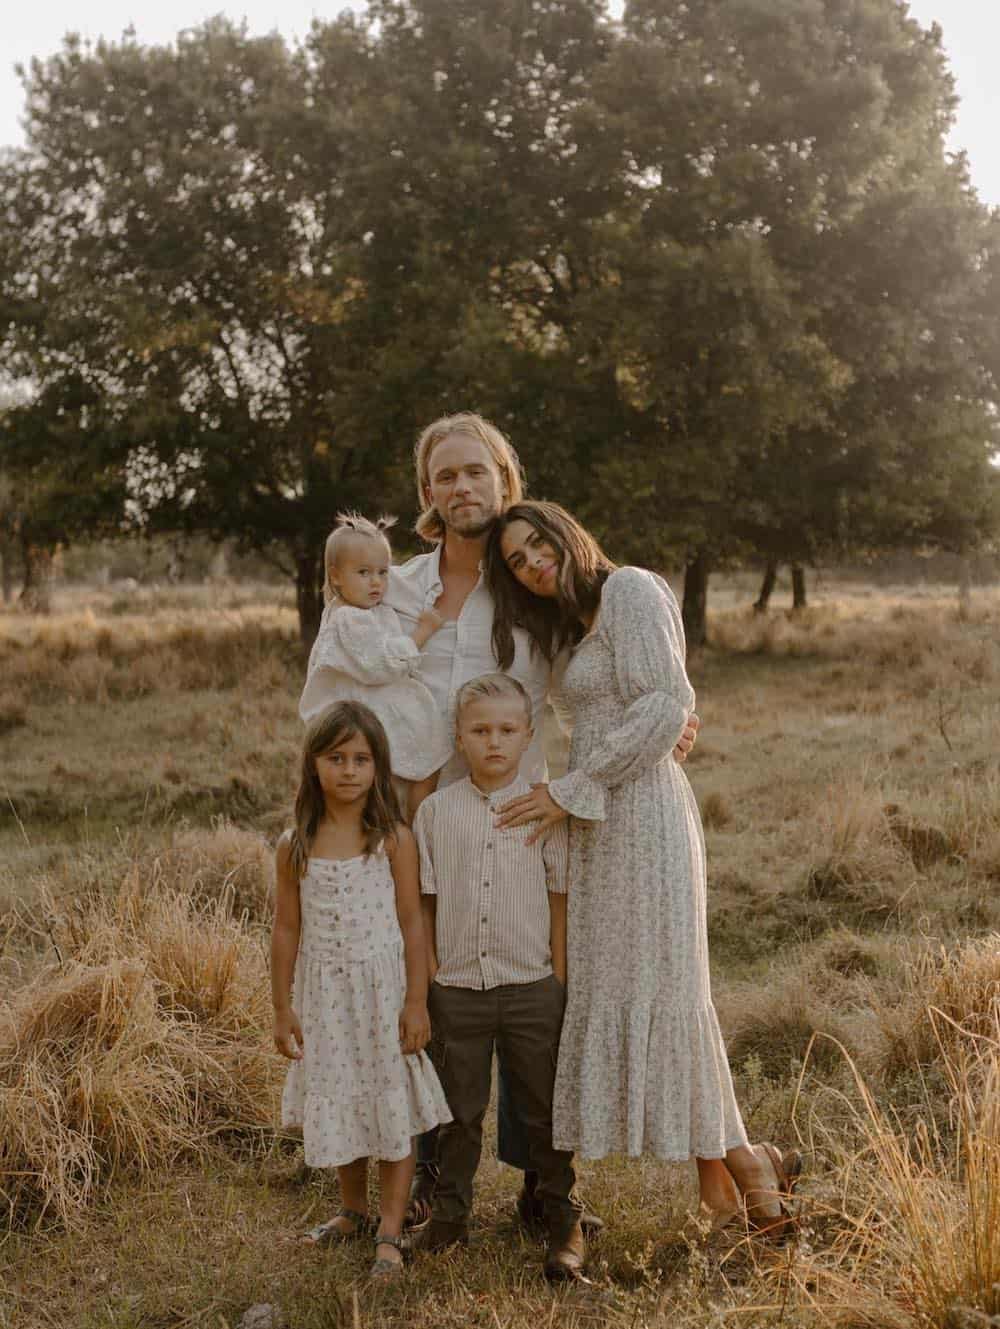 a family portrait featuring neutral outfits, floral prints, and dresses for the mom and girls